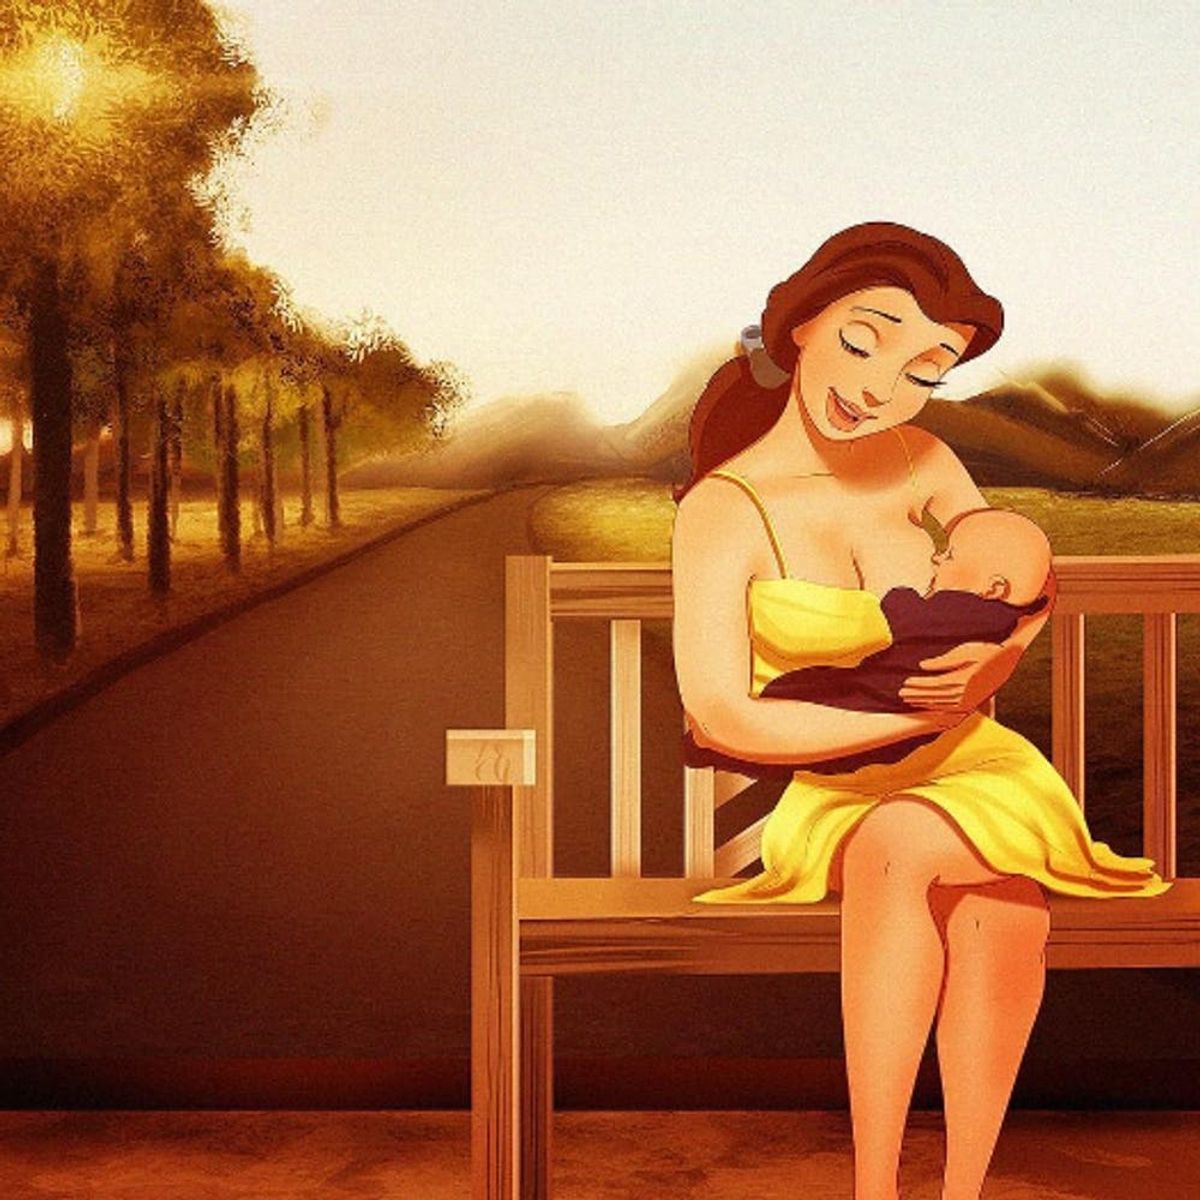 This Artist Draws Disney Princesses As Moms and They’re Relatable AF